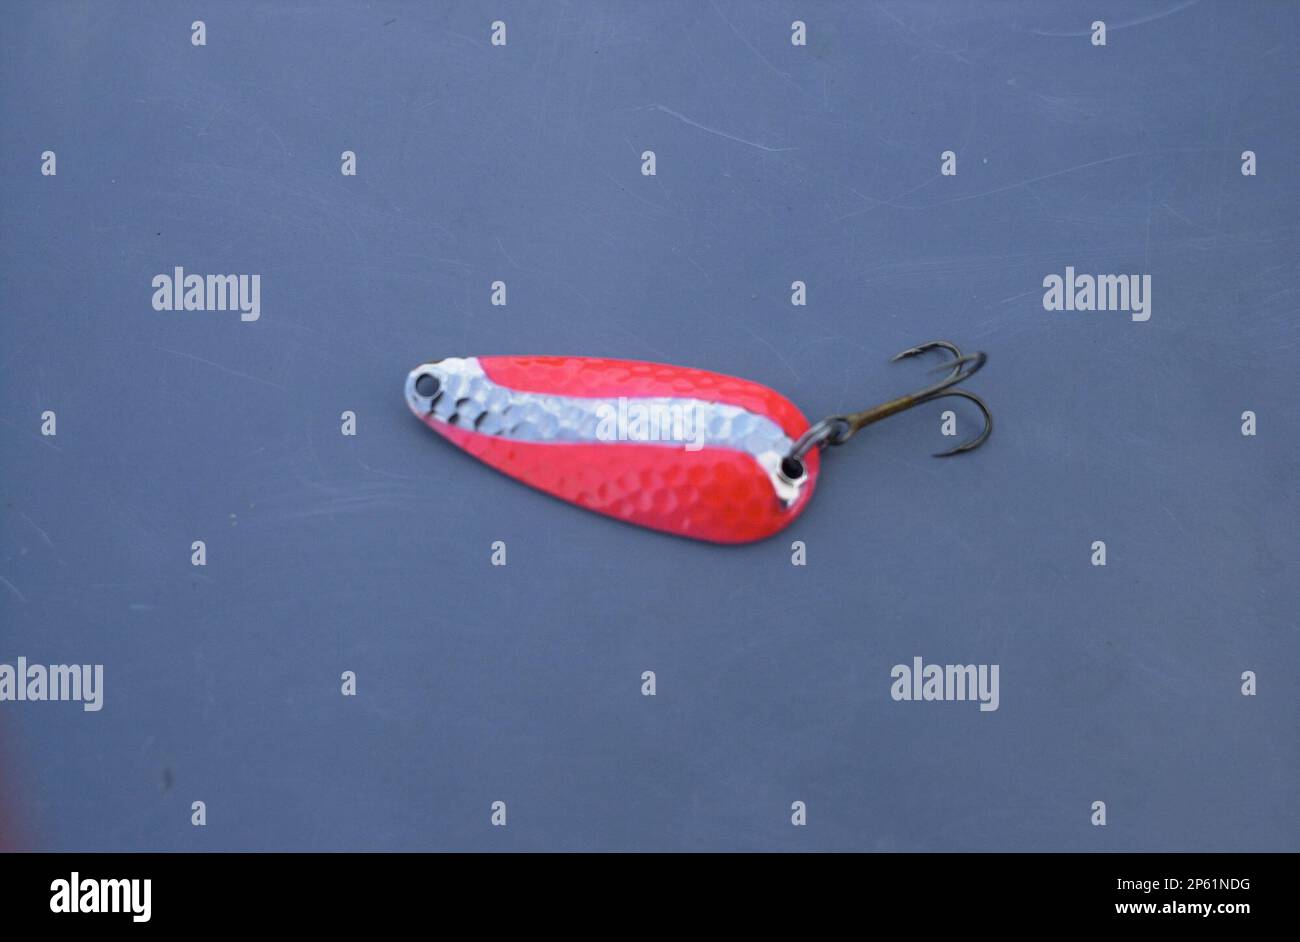 https://c8.alamy.com/comp/2P61NDG/a-spoon-fishing-lure-is-shown-in-this-oct-20-2012-photo-in-riggins-idaho-the-lure-one-of-many-that-are-good-for-fishing-idahos-salmon-river-for-steelhead-fishing-for-steelhead-with-spoons-and-spinners-is-exciting-but-often-ignored-by-anglers-ap-photopete-zimowskyidaho-statesman-2P61NDG.jpg